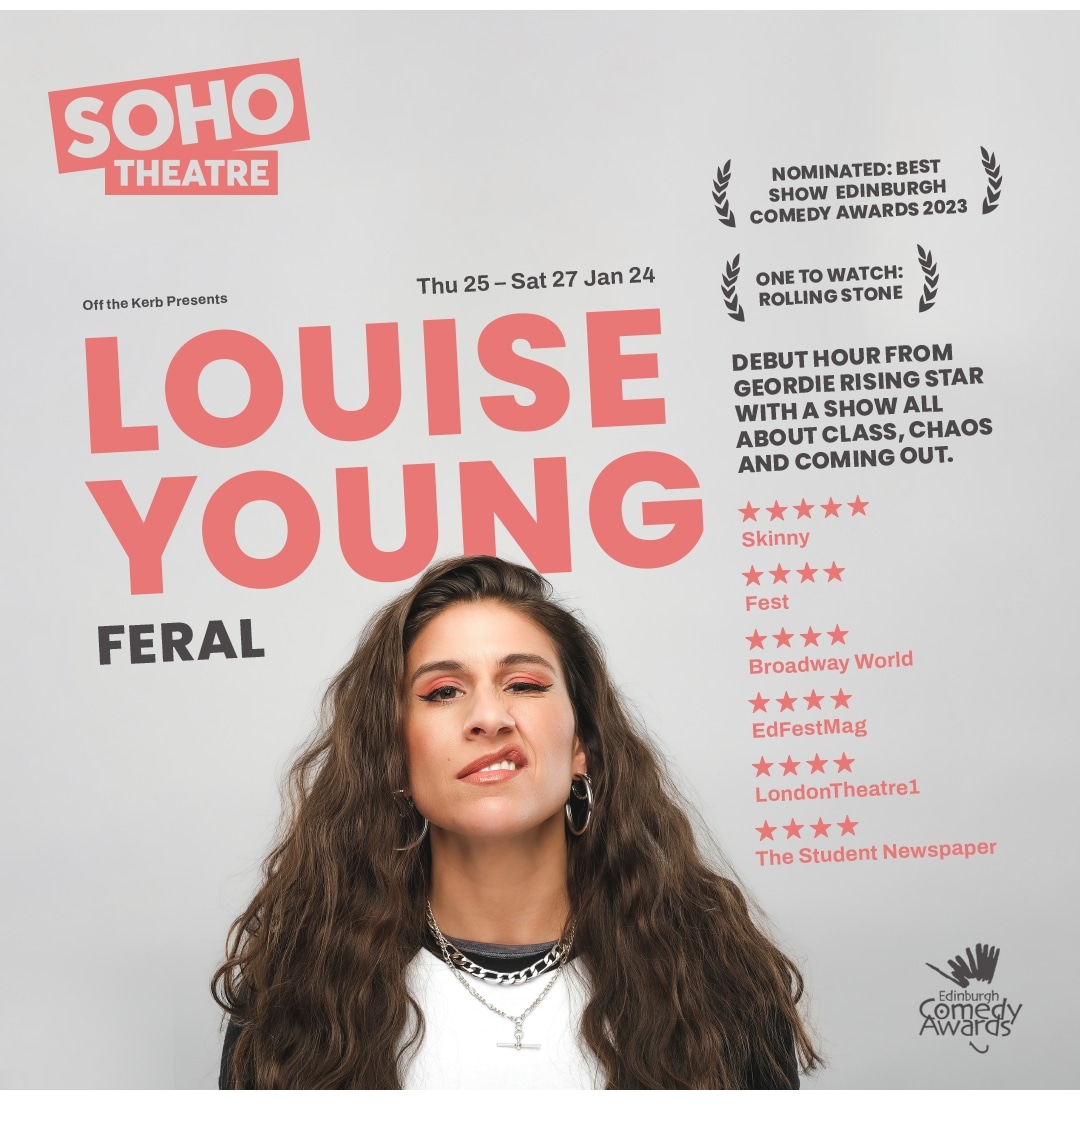 💖 LONDON!! 👅 It's been a blast to perform this show this summer so I'm over the moon to have these nights at @sohotheatre end of Jan (25/26/27). Don't try and wriggle out of coming along, I know you'll have nothing else on that time of year xxxx sohotheatre.com/events/louise-…